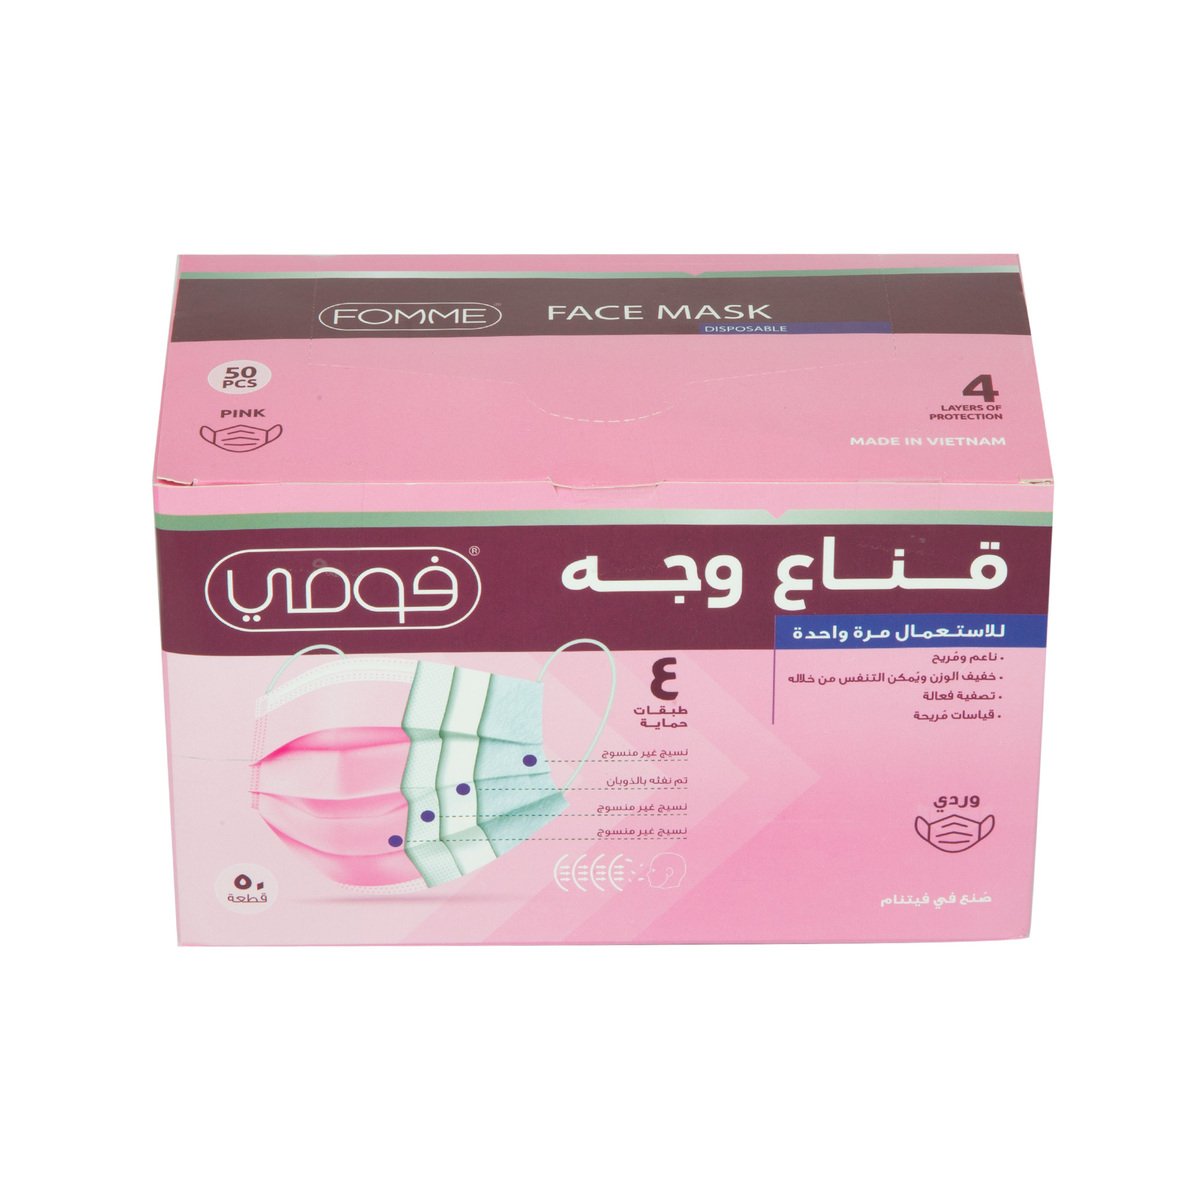 Fomme Disposable Face Mask Pink 4ply 50pcs